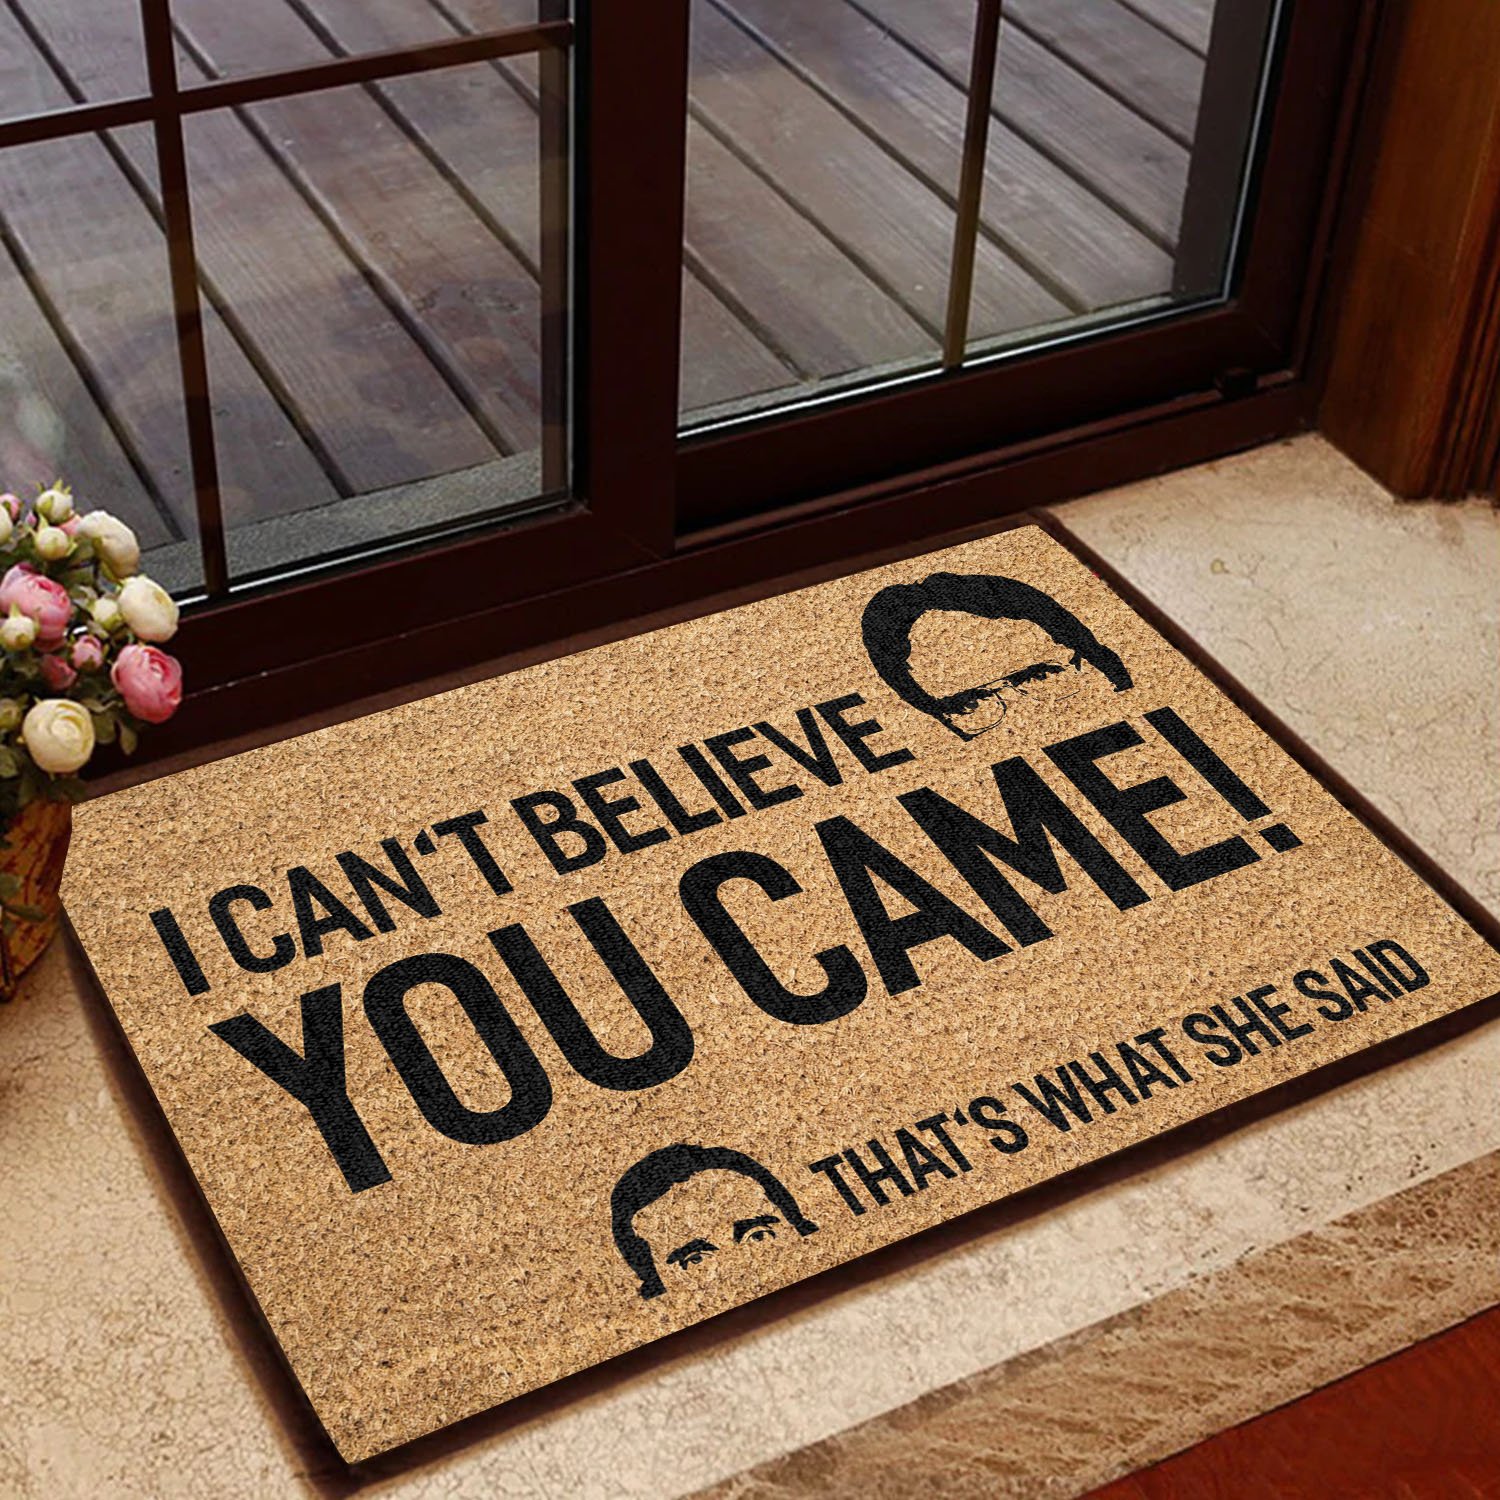 I can't believe you came that's what she said doormat